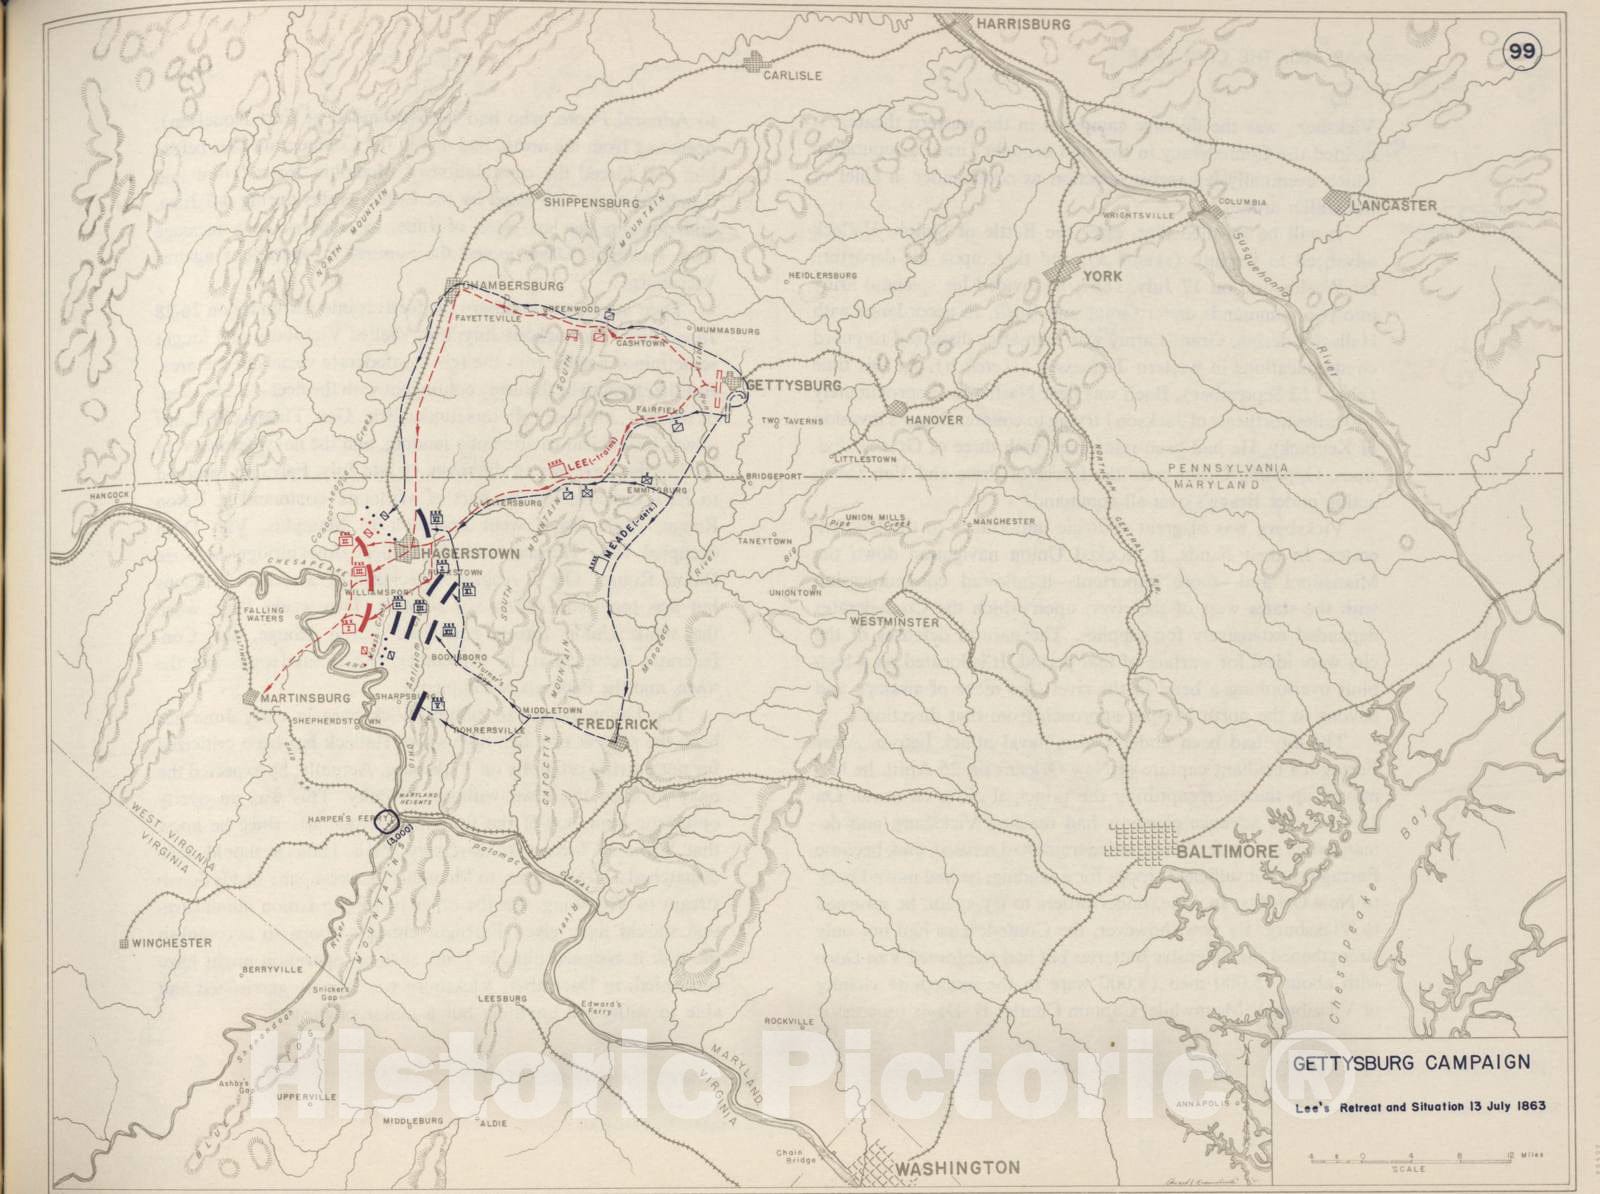 Historic 1962 Map - The West Point Atlas of The Civil War - Gettysburg Campaign, June 1863 3